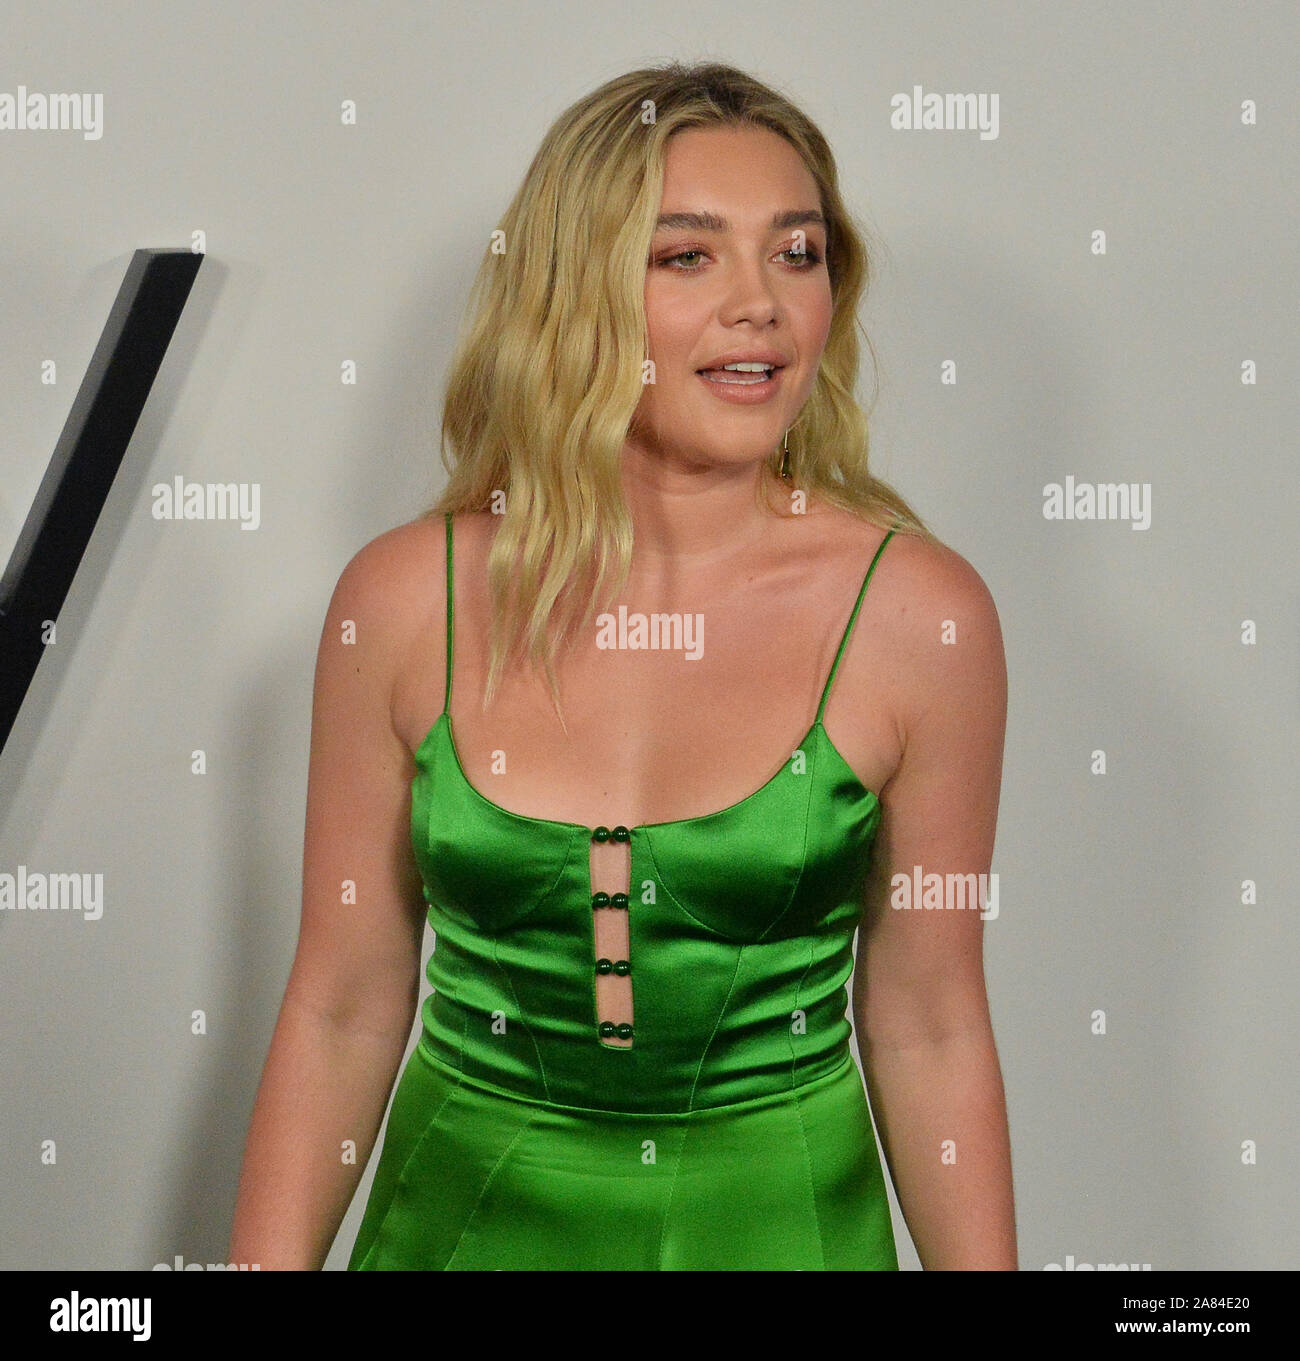 Los Angeles, United States. 05th Nov, 2019. English actress Florence Pugh attends the premiere of the motion picture romantic comedy 'Marriage Story' at the DGA Theatre in Los Angeles on Tuesday, November 5, 2019. Storyline: The film is Academy Award nominated filmmaker Noah Baumbach's incisive and compassionate look at a marriage breaking up and a family staying together. Photo by Jim Ruymen/UPI Credit: UPI/Alamy Live News Stock Photo